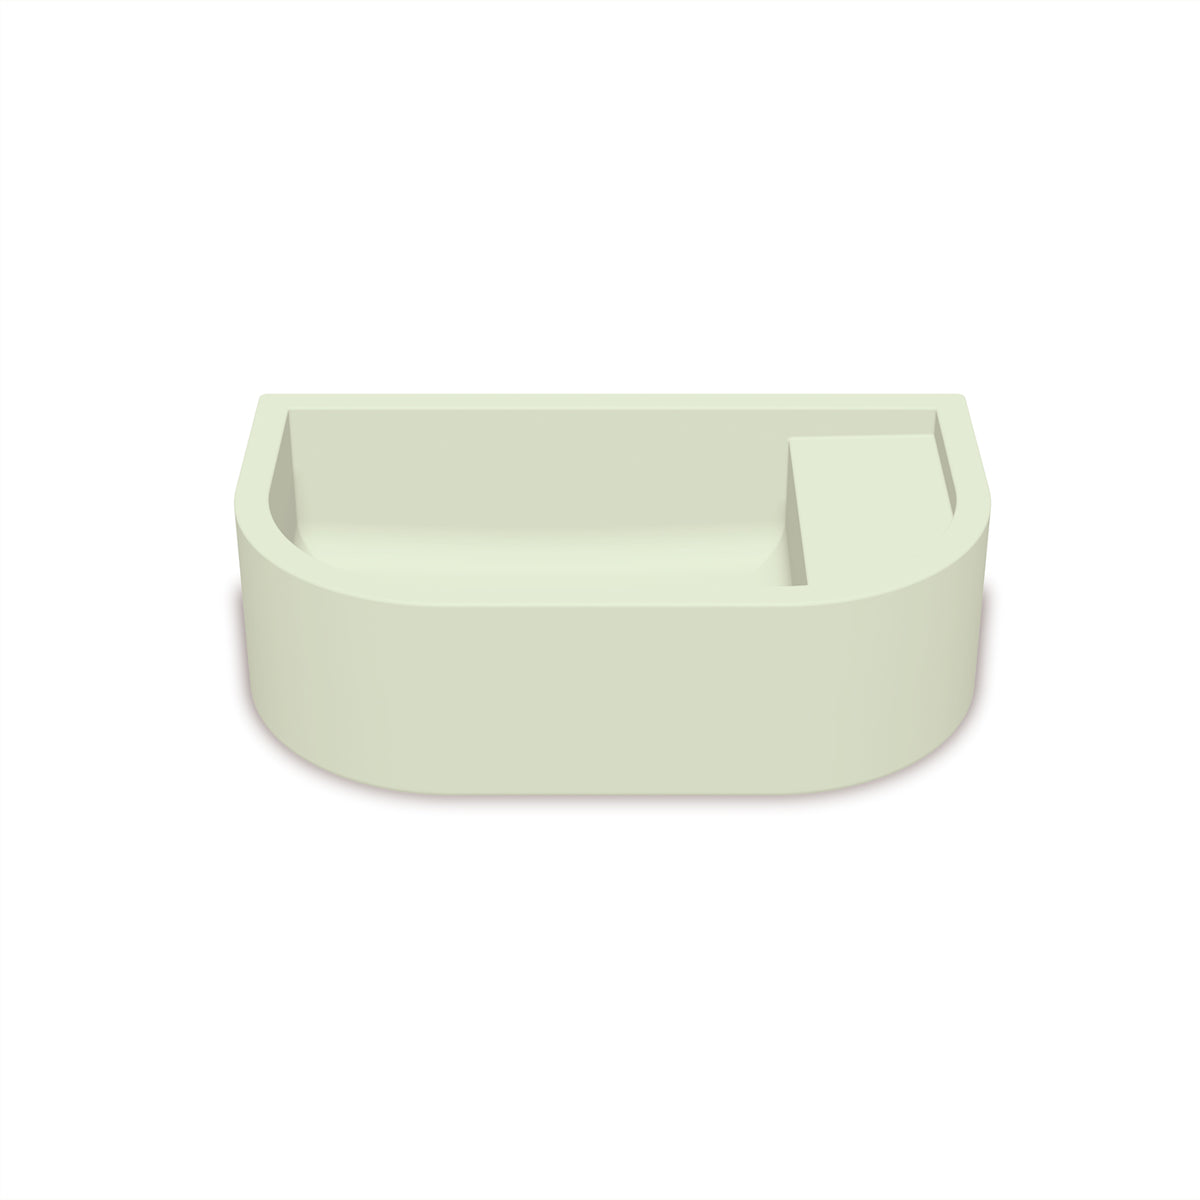 Loop 01 Basin - Overflow - Surface Mount (Mint,No Tap Hole,Brass)